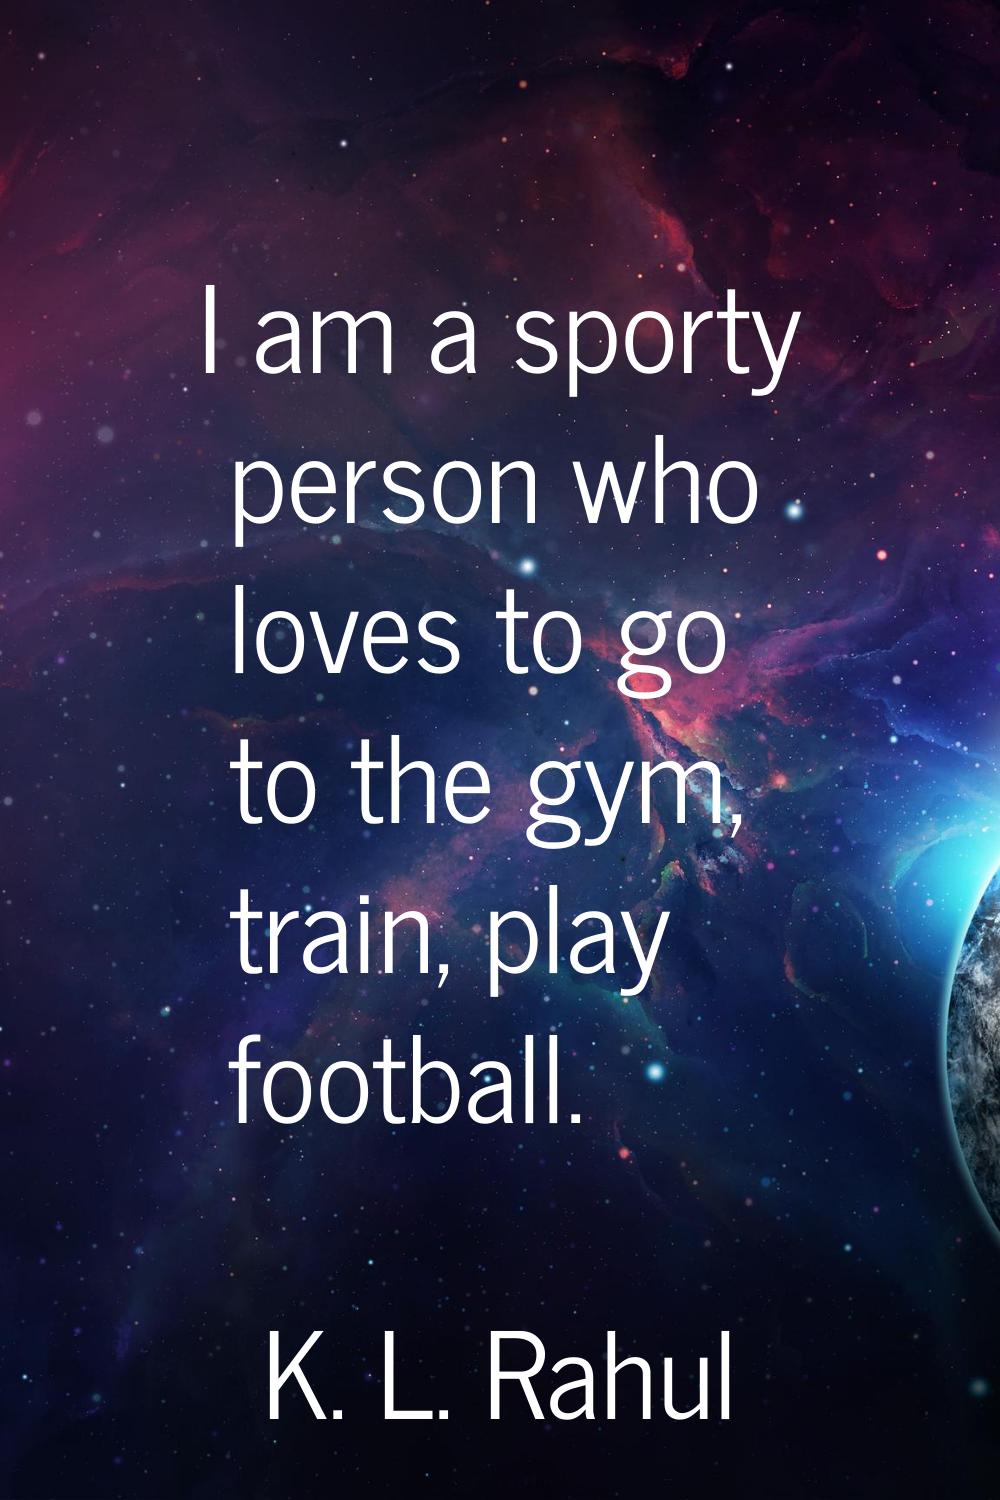 I am a sporty person who loves to go to the gym, train, play football.